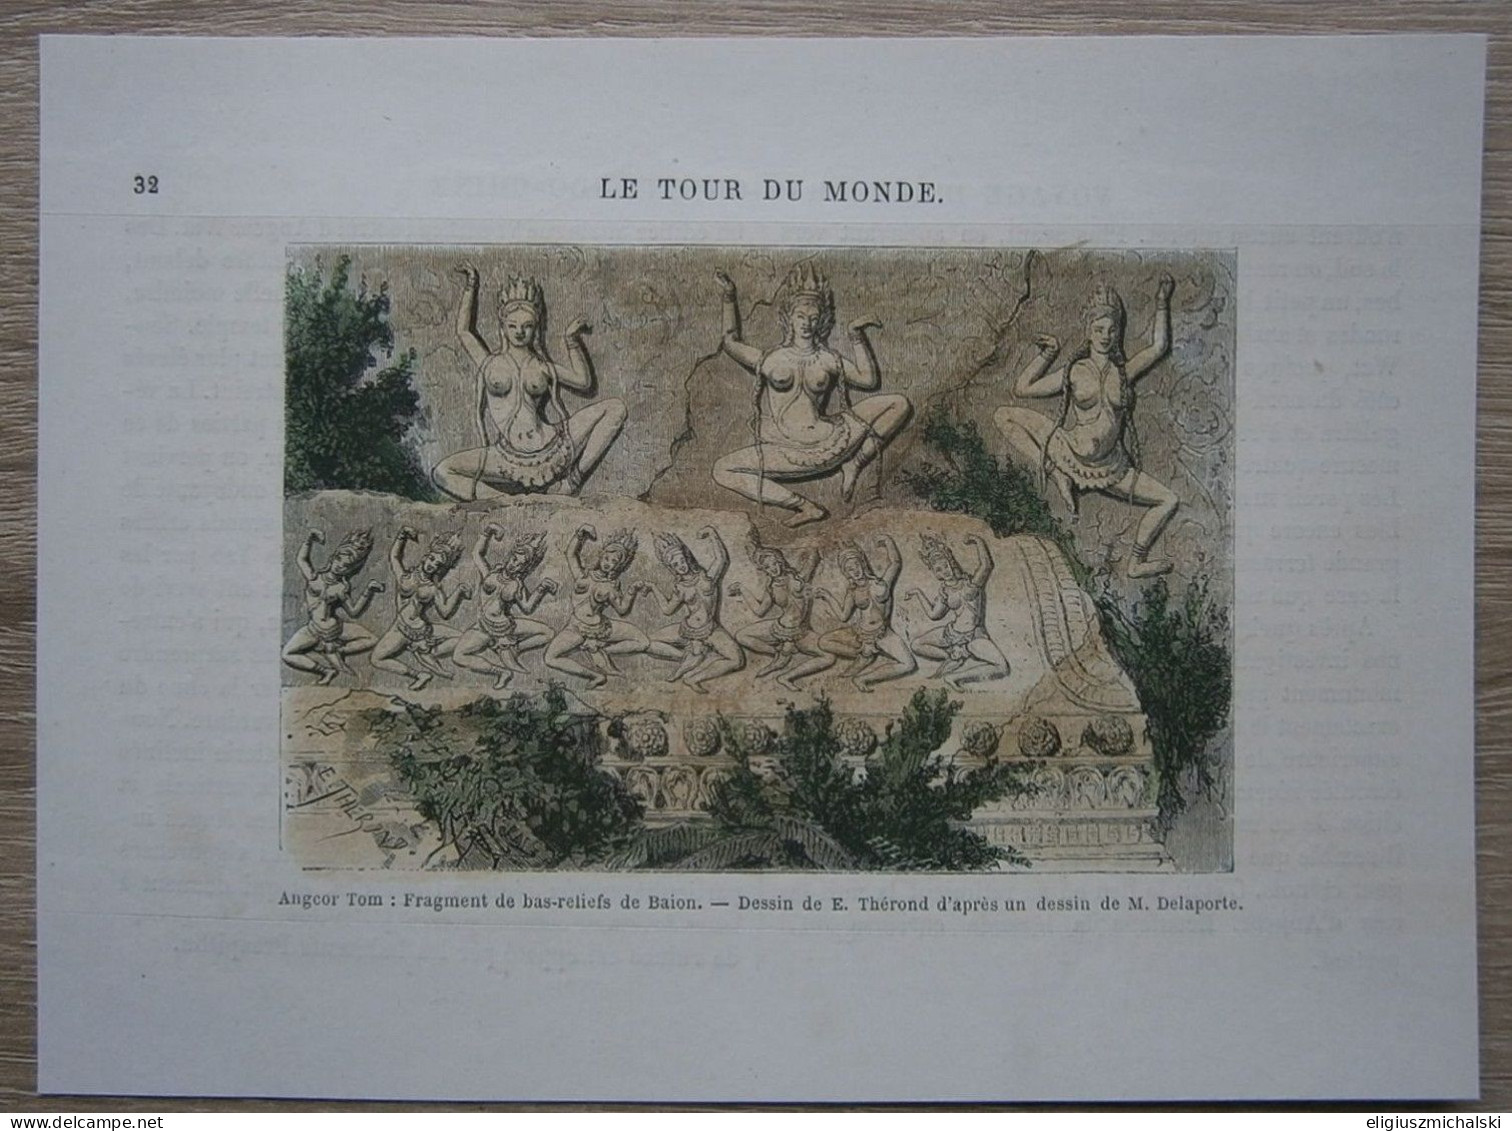 12 Prints Of Cambodia Published In "Le Tour Du Monde" In Year 1871 - Prints & Engravings